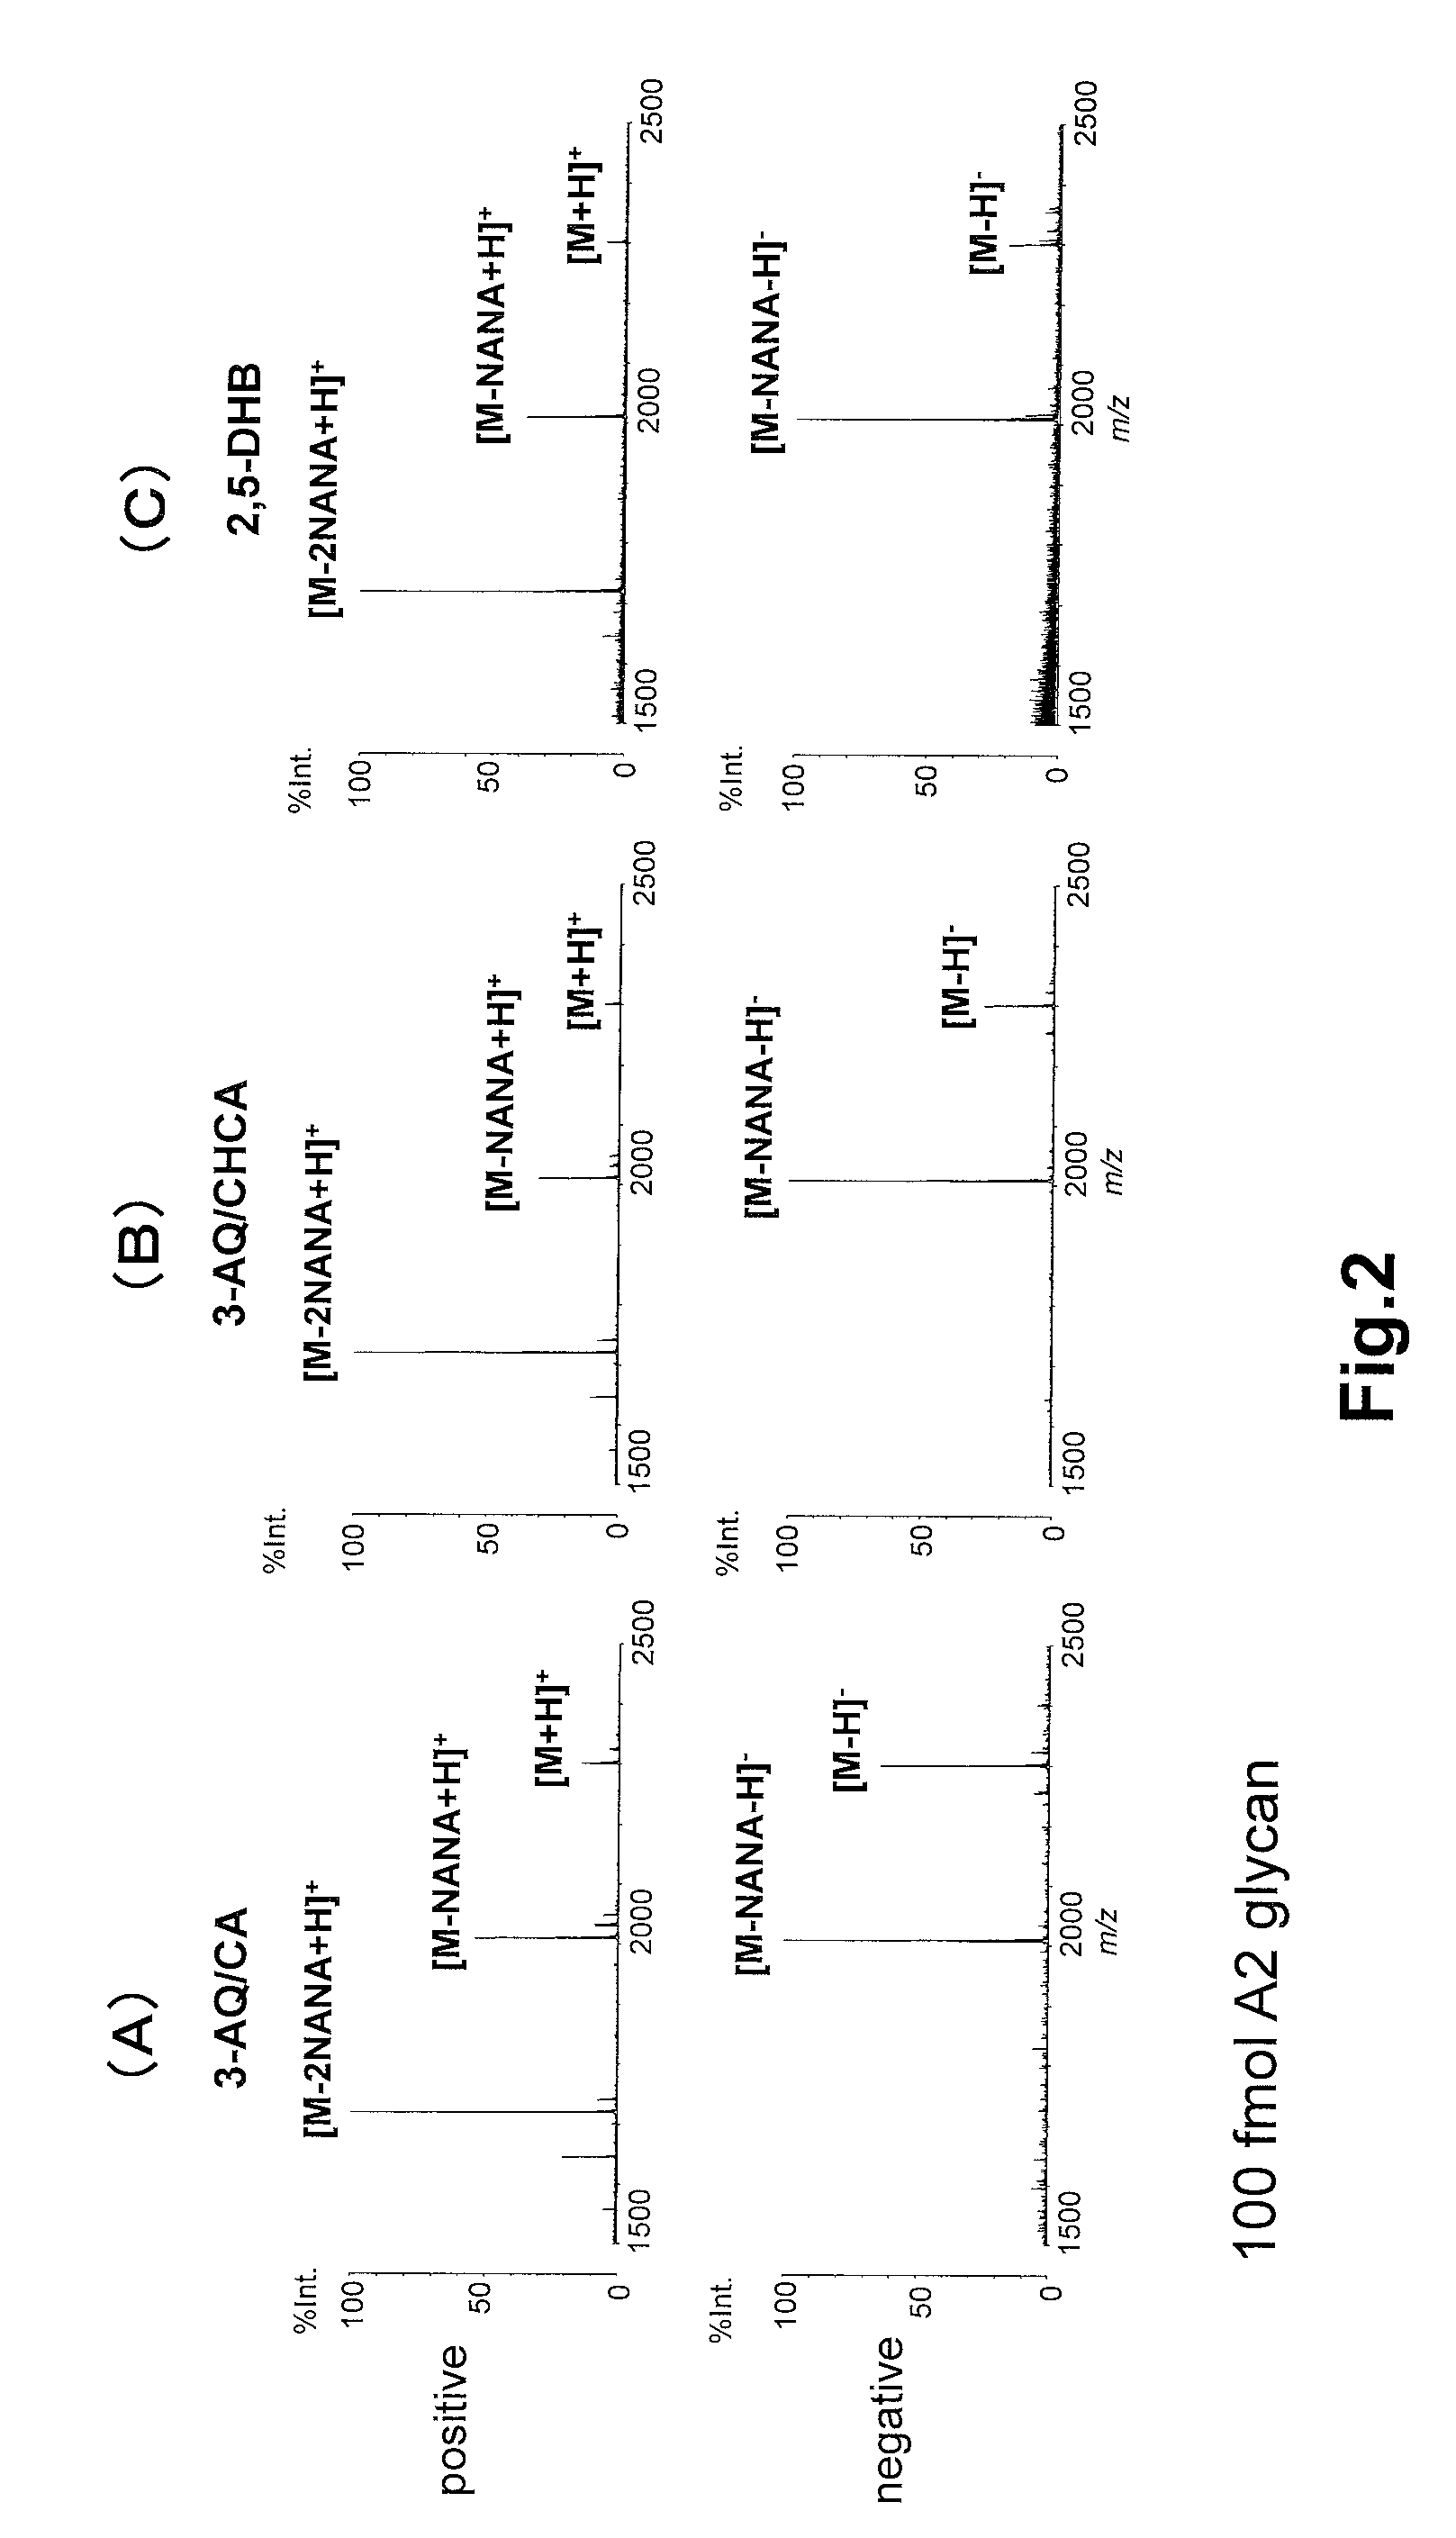 Mass spectrometry method of phosphorylated peptides and sugar chains